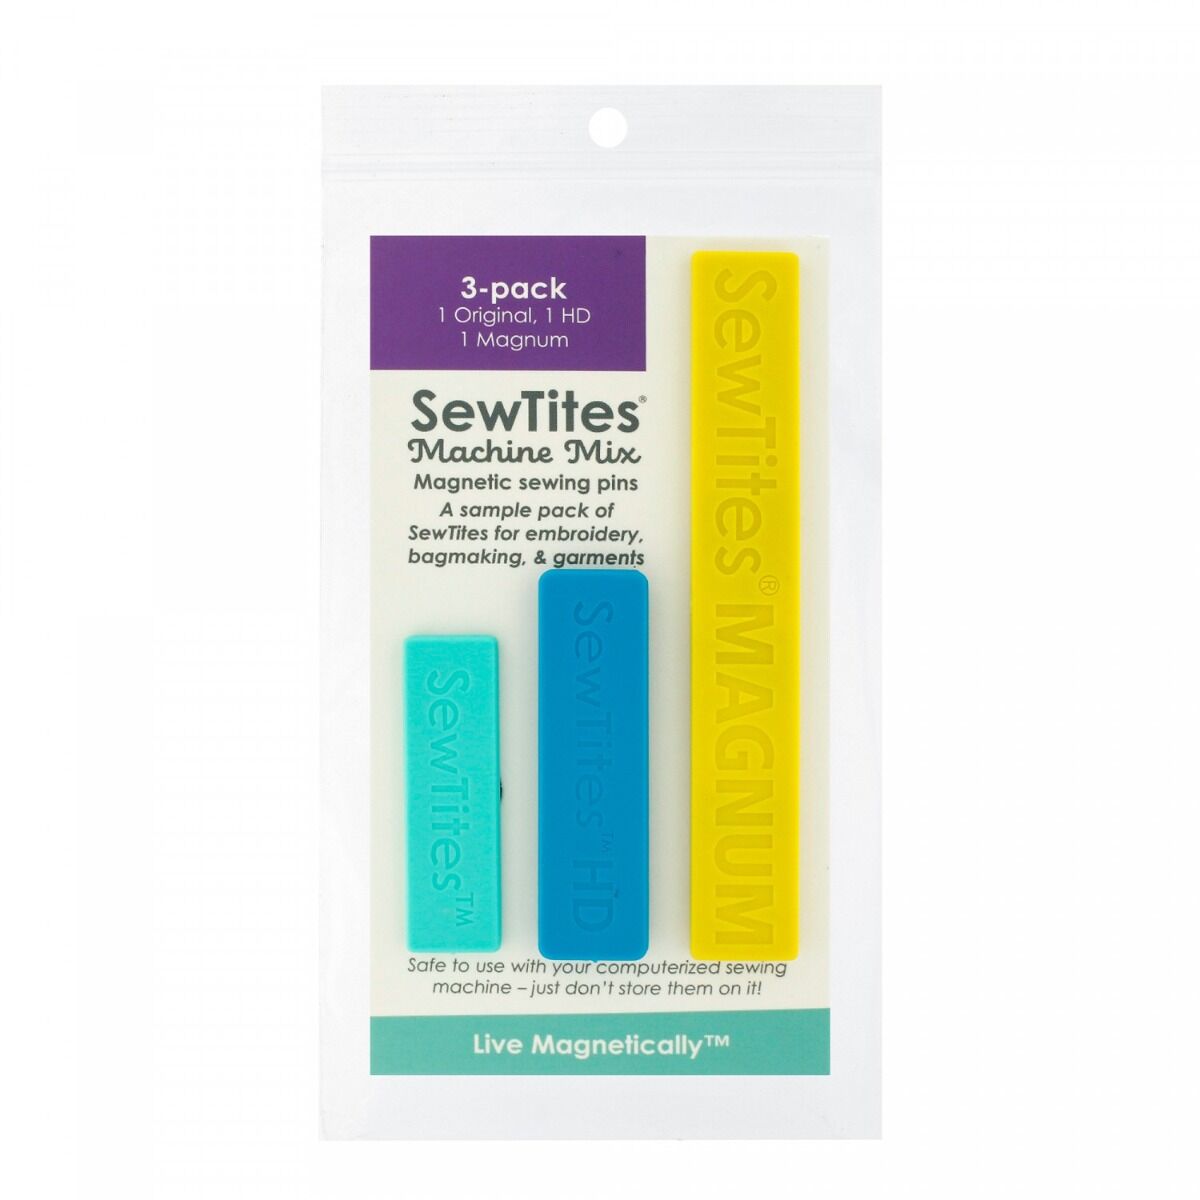 SewTites Magnetic Pins Machine Mix - 3 Pack
